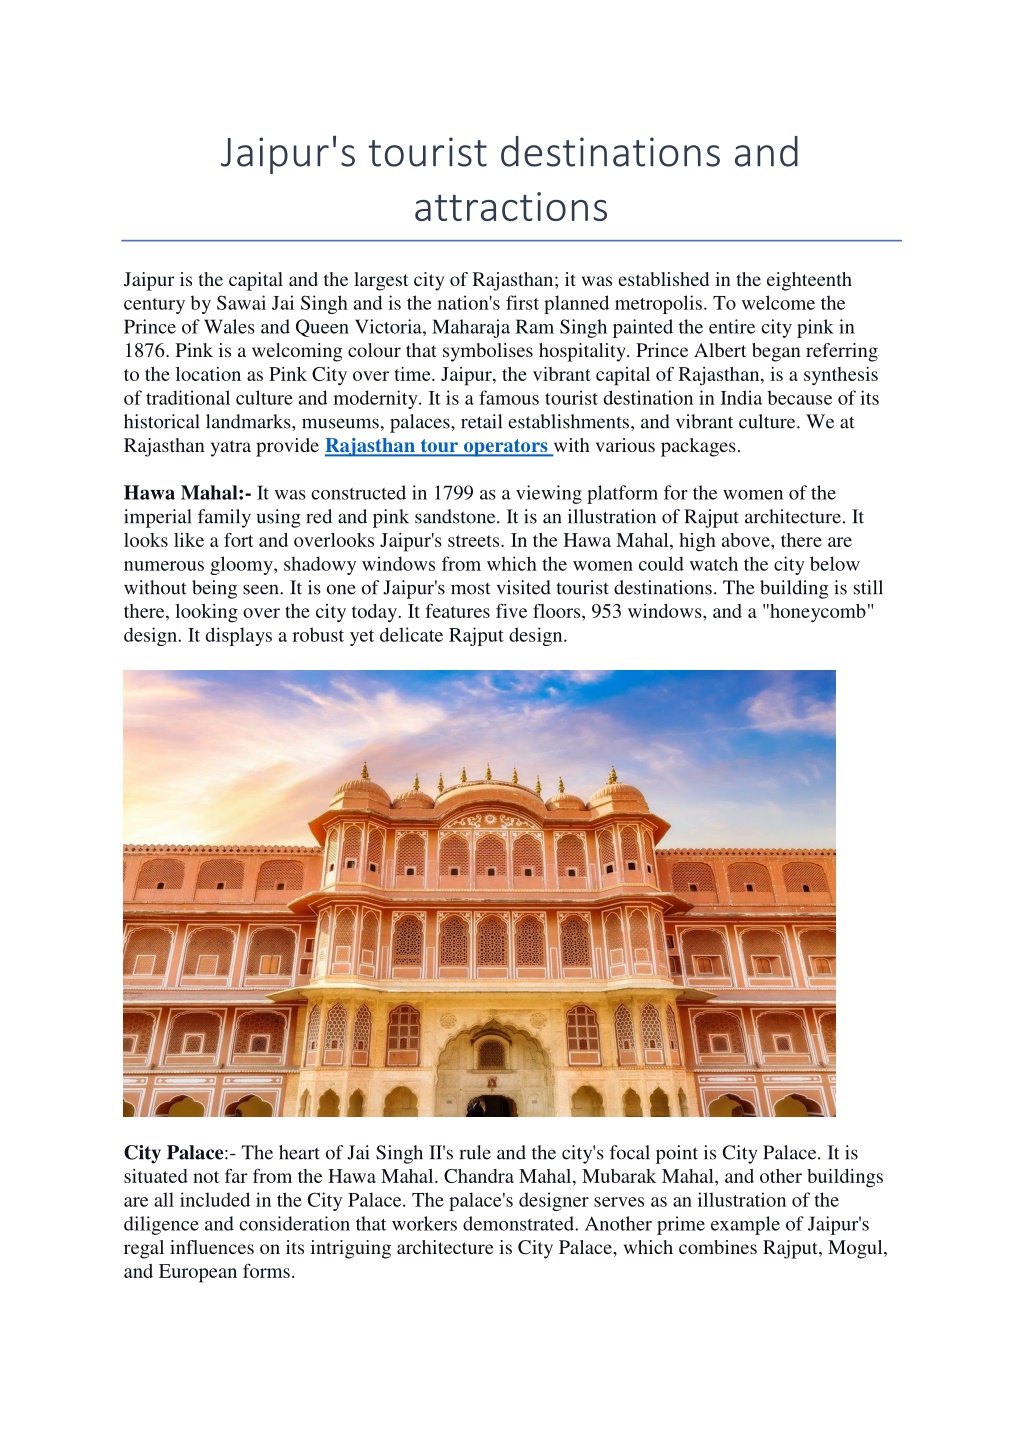 PPT - Jaipur's tourist destinations and attractions PowerPoint ...